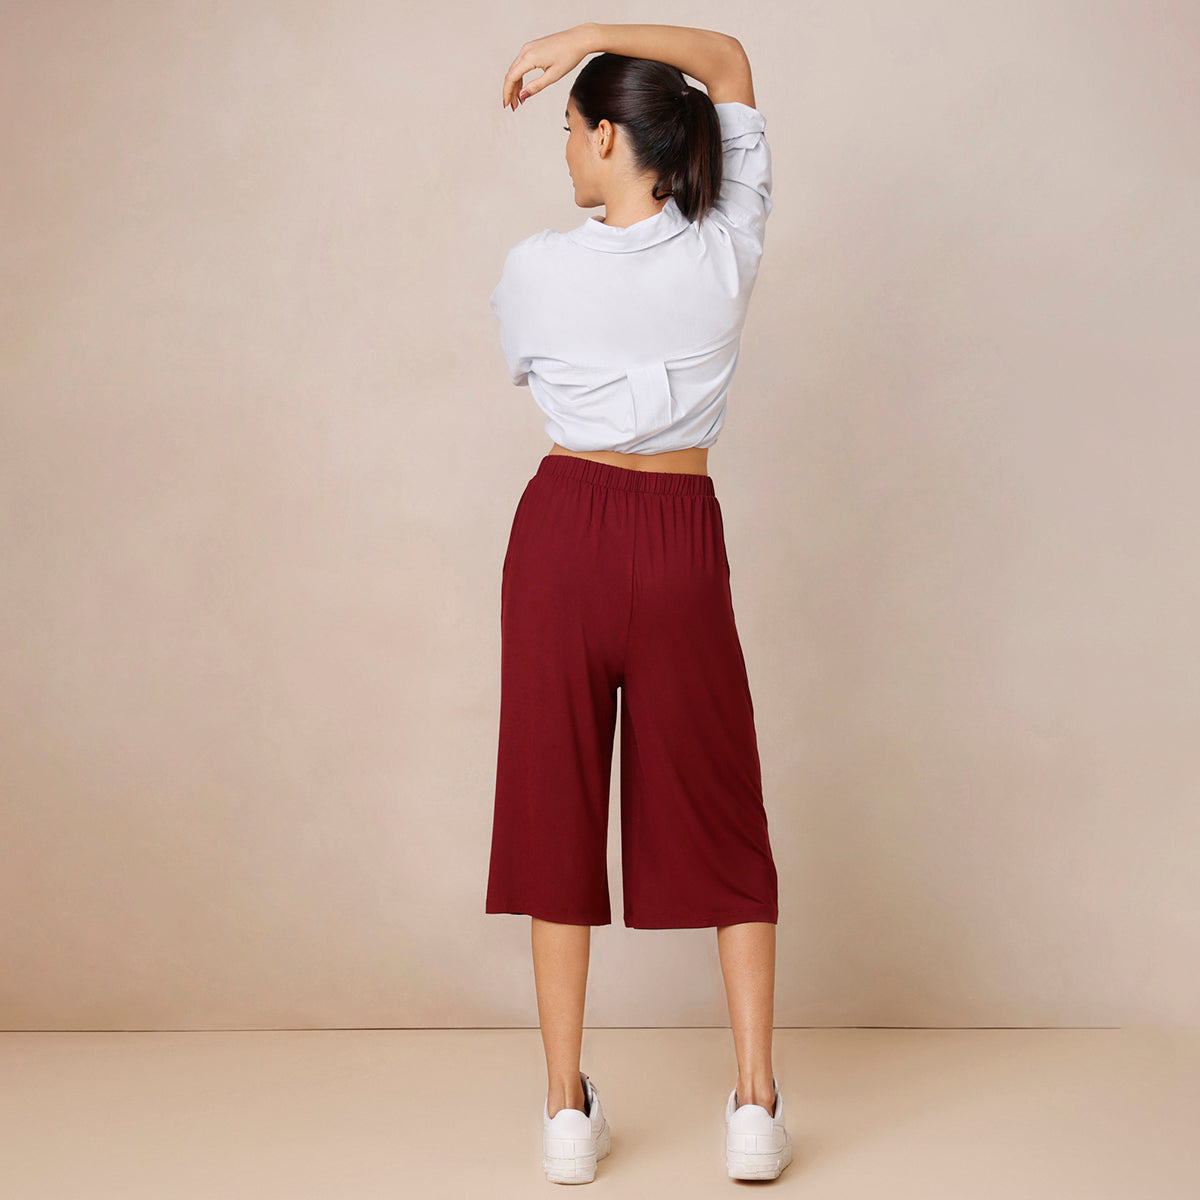 Nykd All Day Sooo Comfy Super Soft Modal Lounge Culottes-NYLE059 Windsor wine